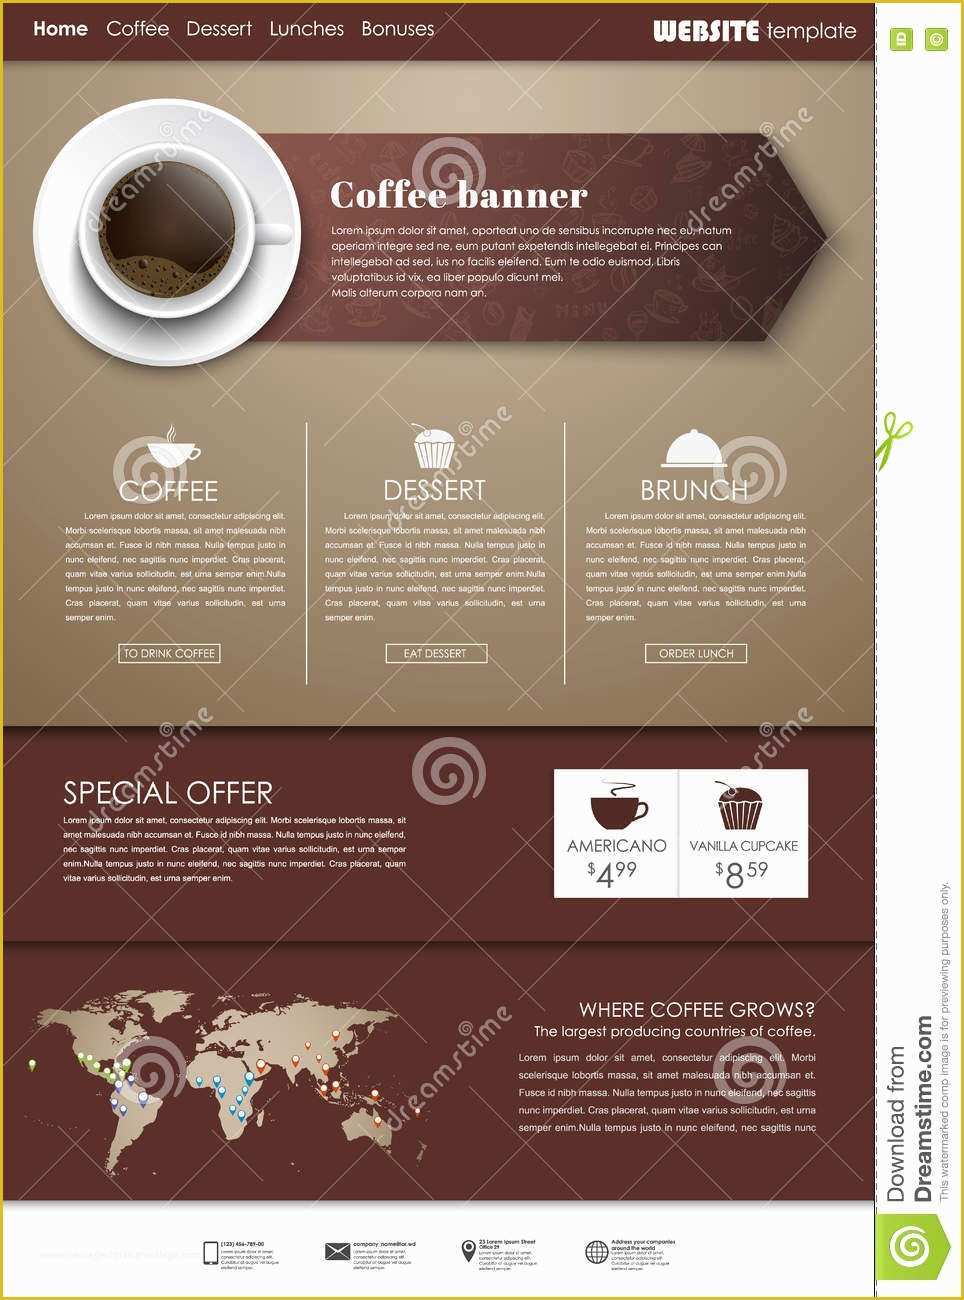 Coffee Shop Website Template Free Download Of Cafes Cartoons Illustrations &amp; Vector Stock 1264